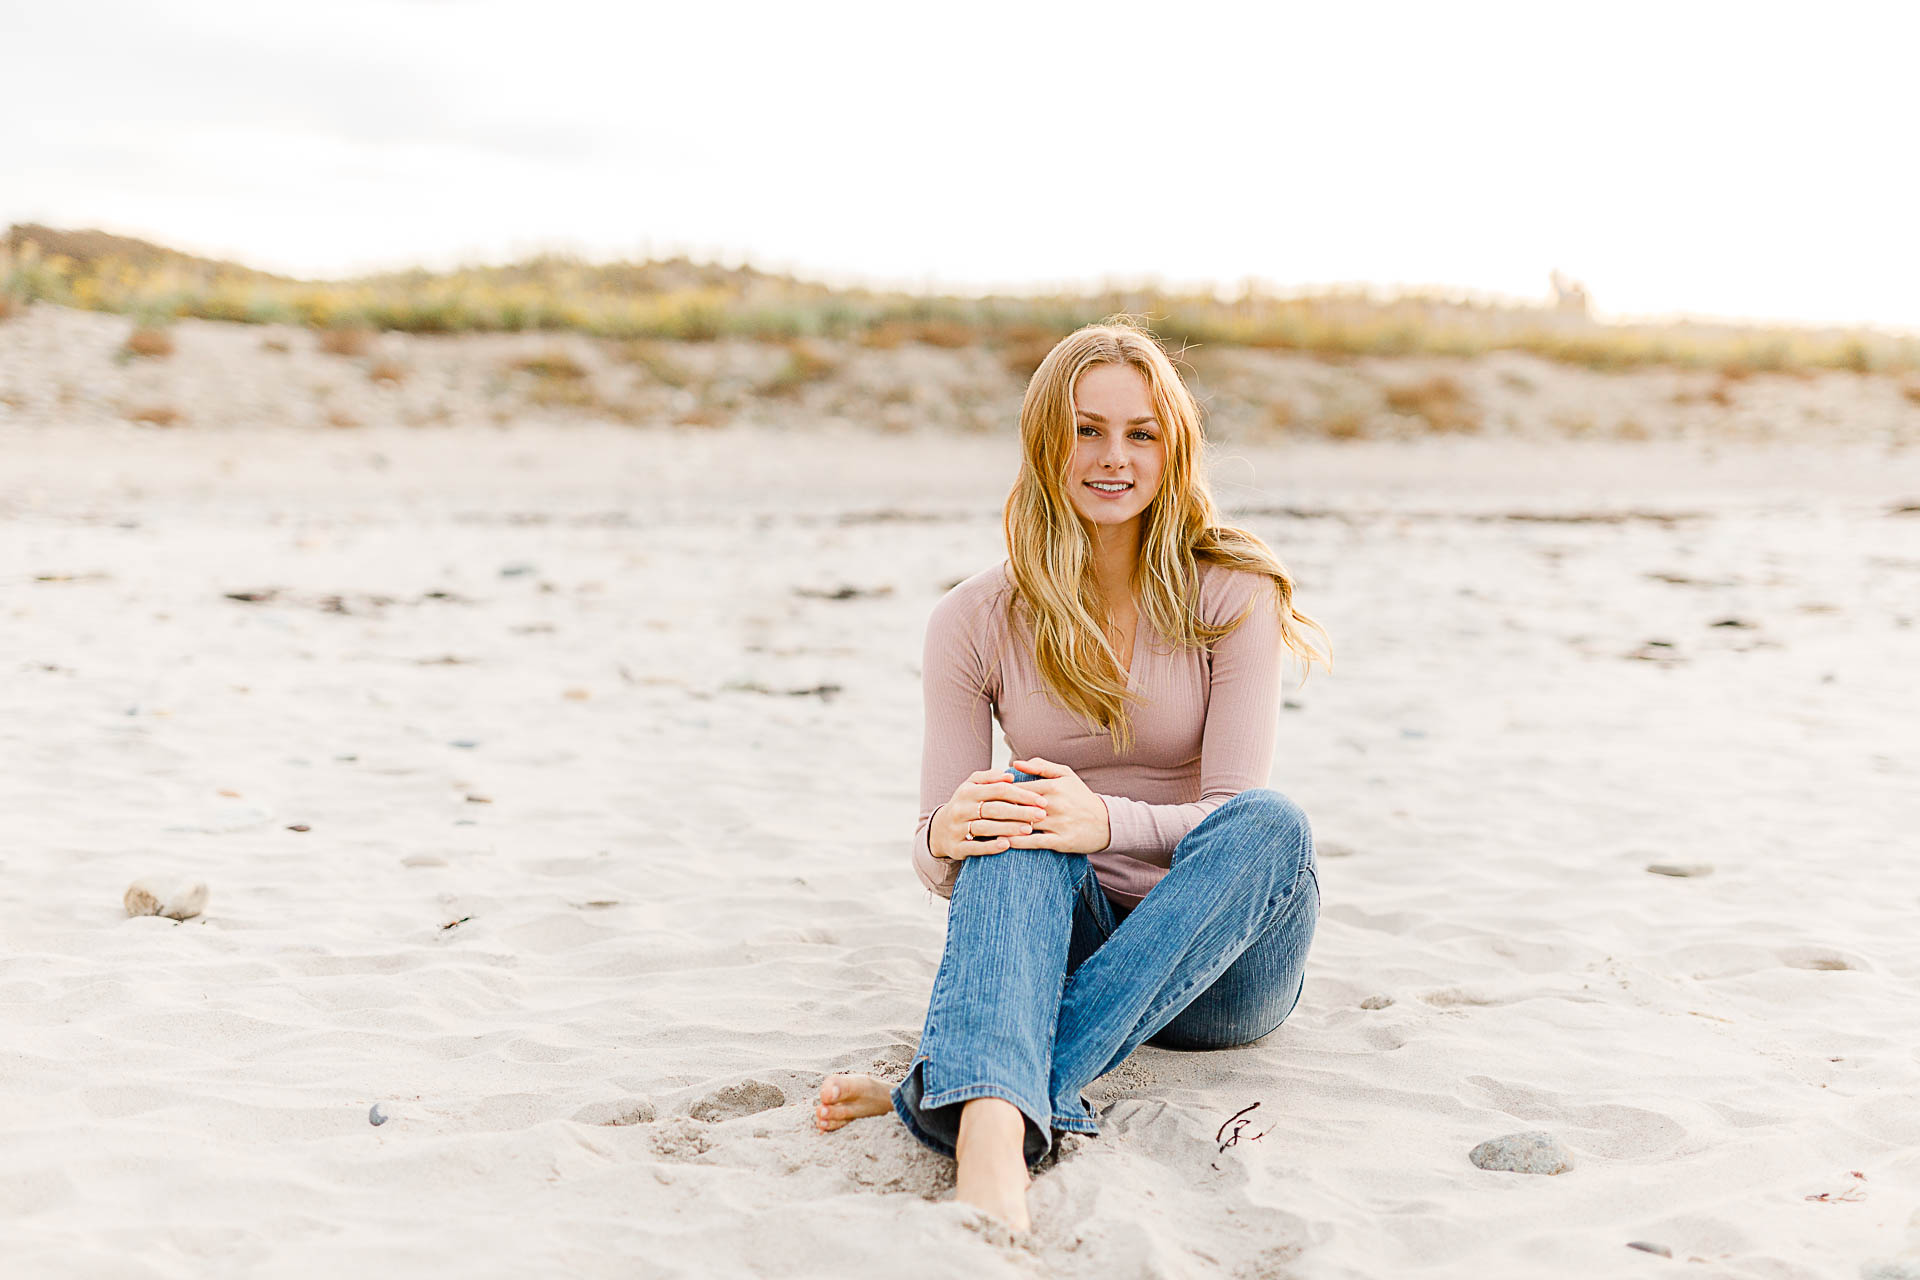 Photo by Scituate Senior Portrait Photographer Christina Runnals | Girl sitting in beach grass wearing a white dress